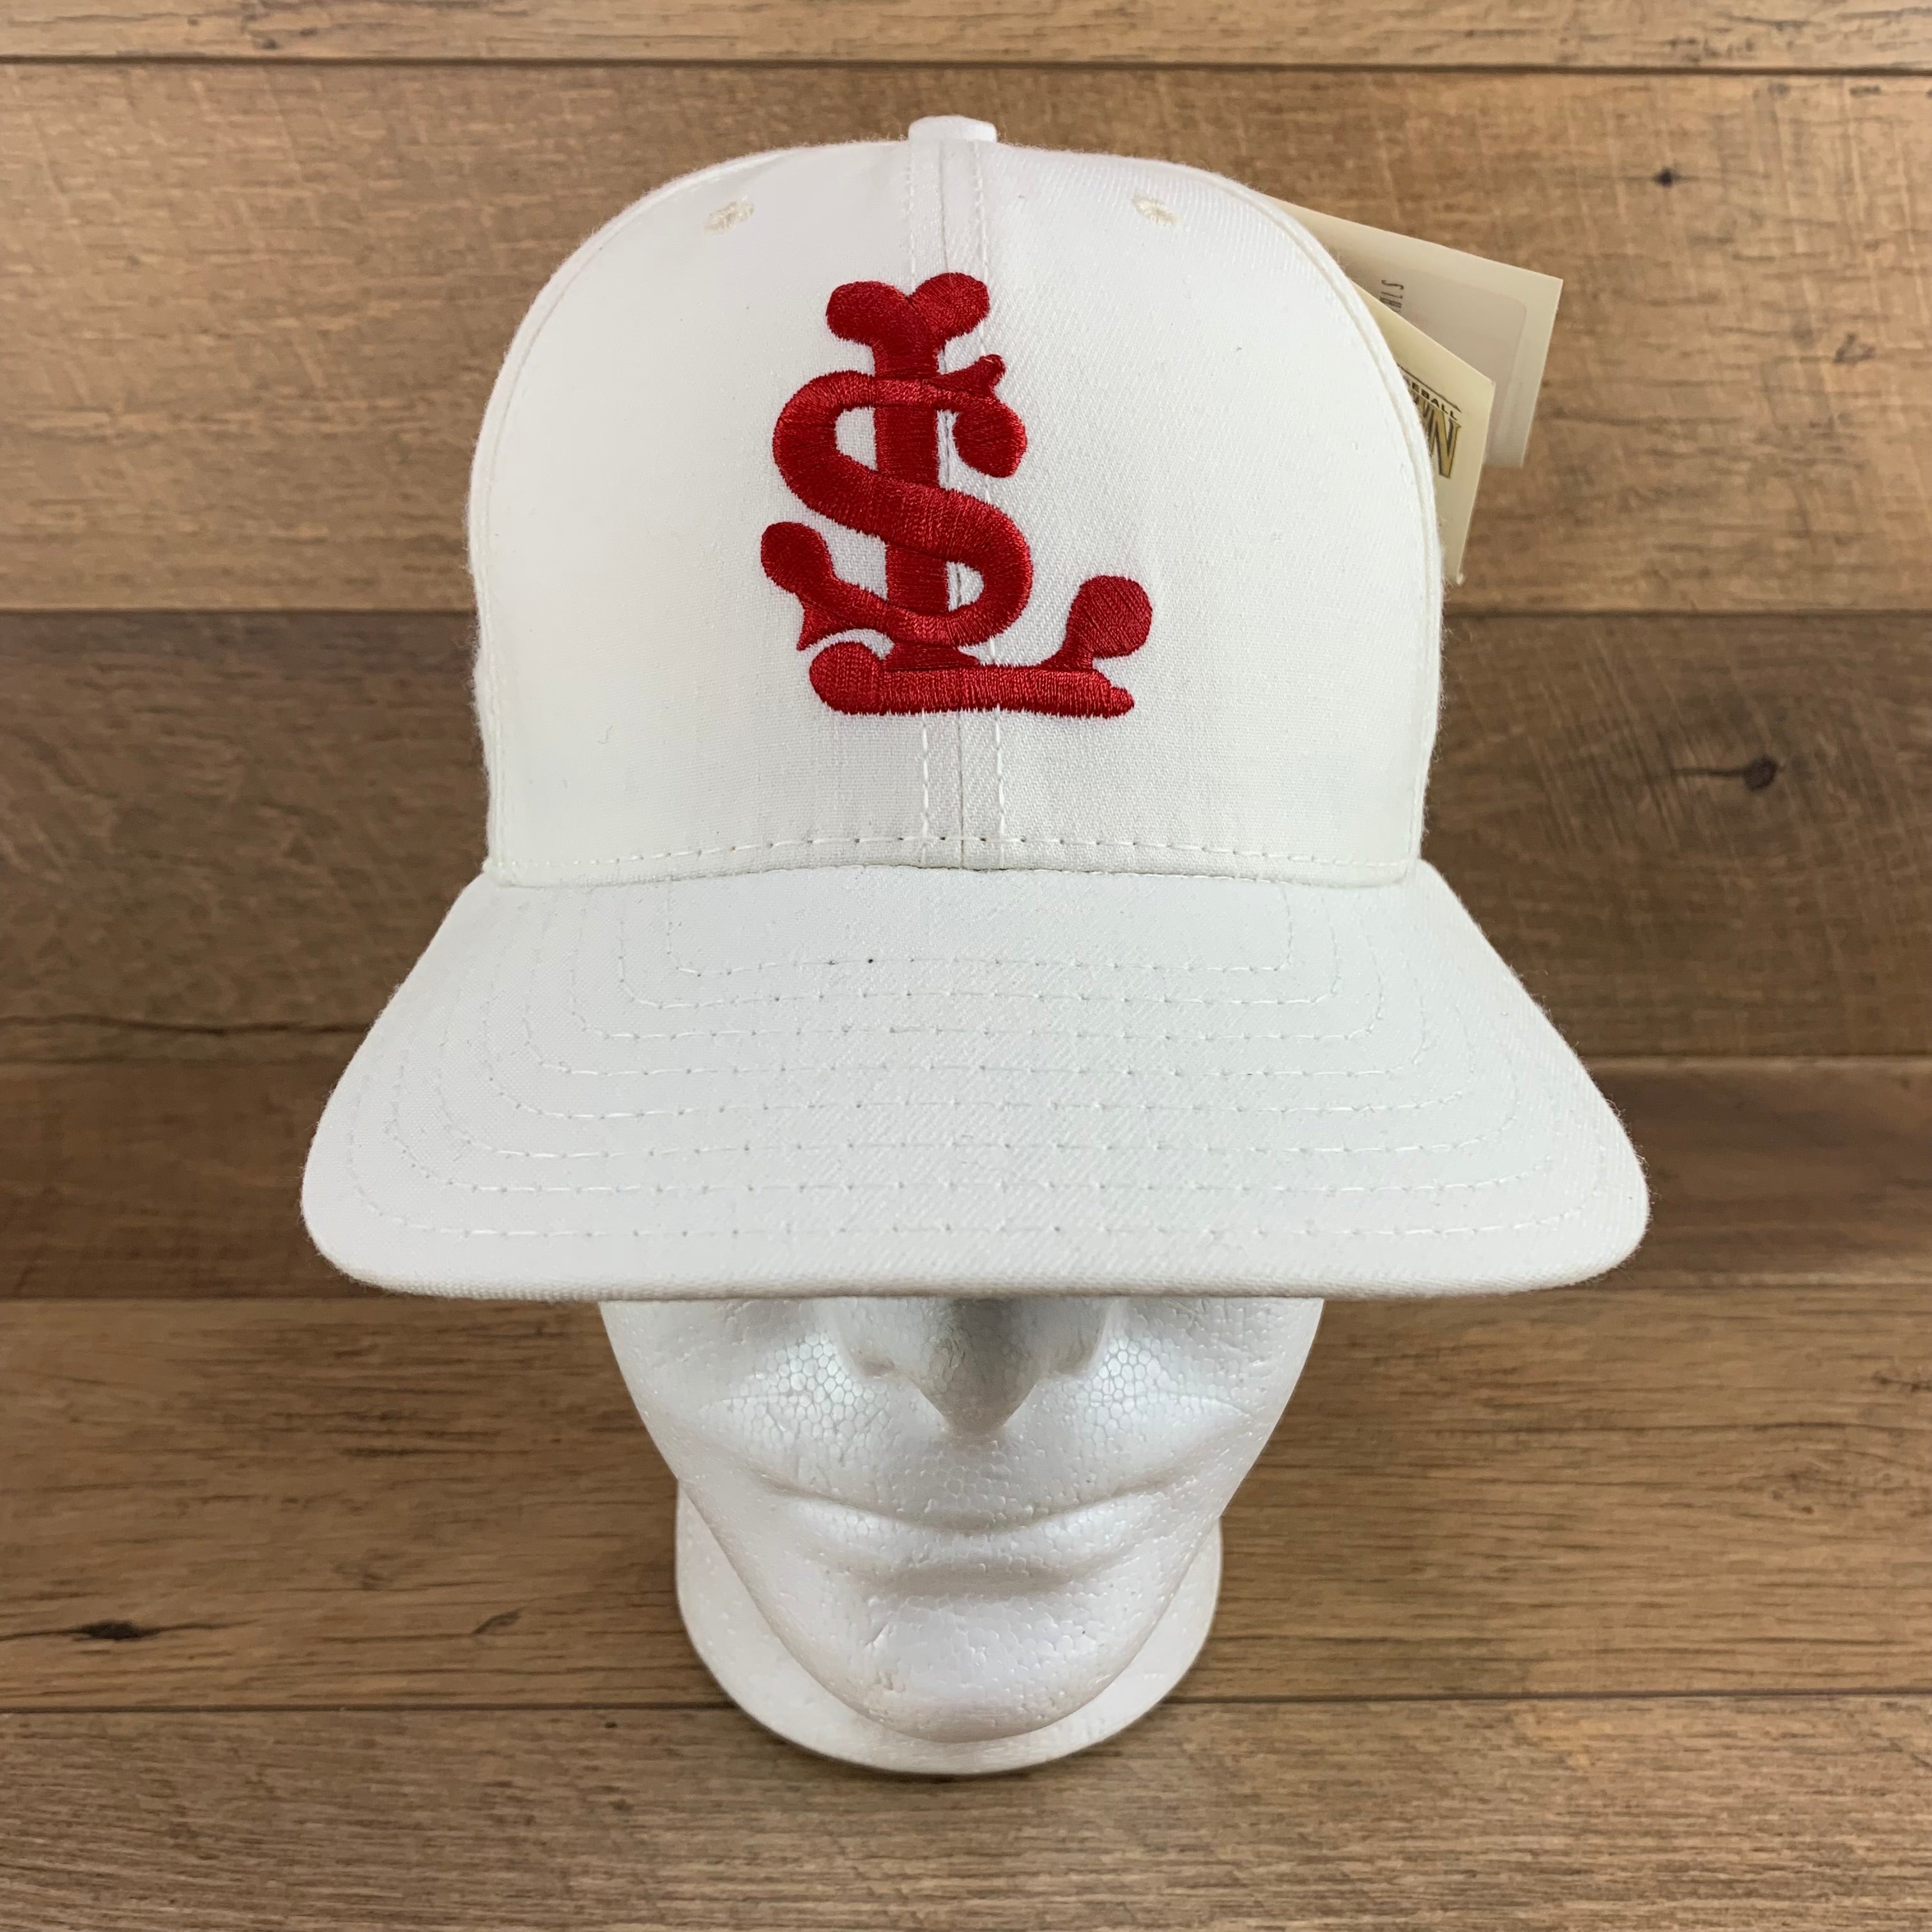 MLB Official Licensed 1903 St. Louis Cardinals Hat 7